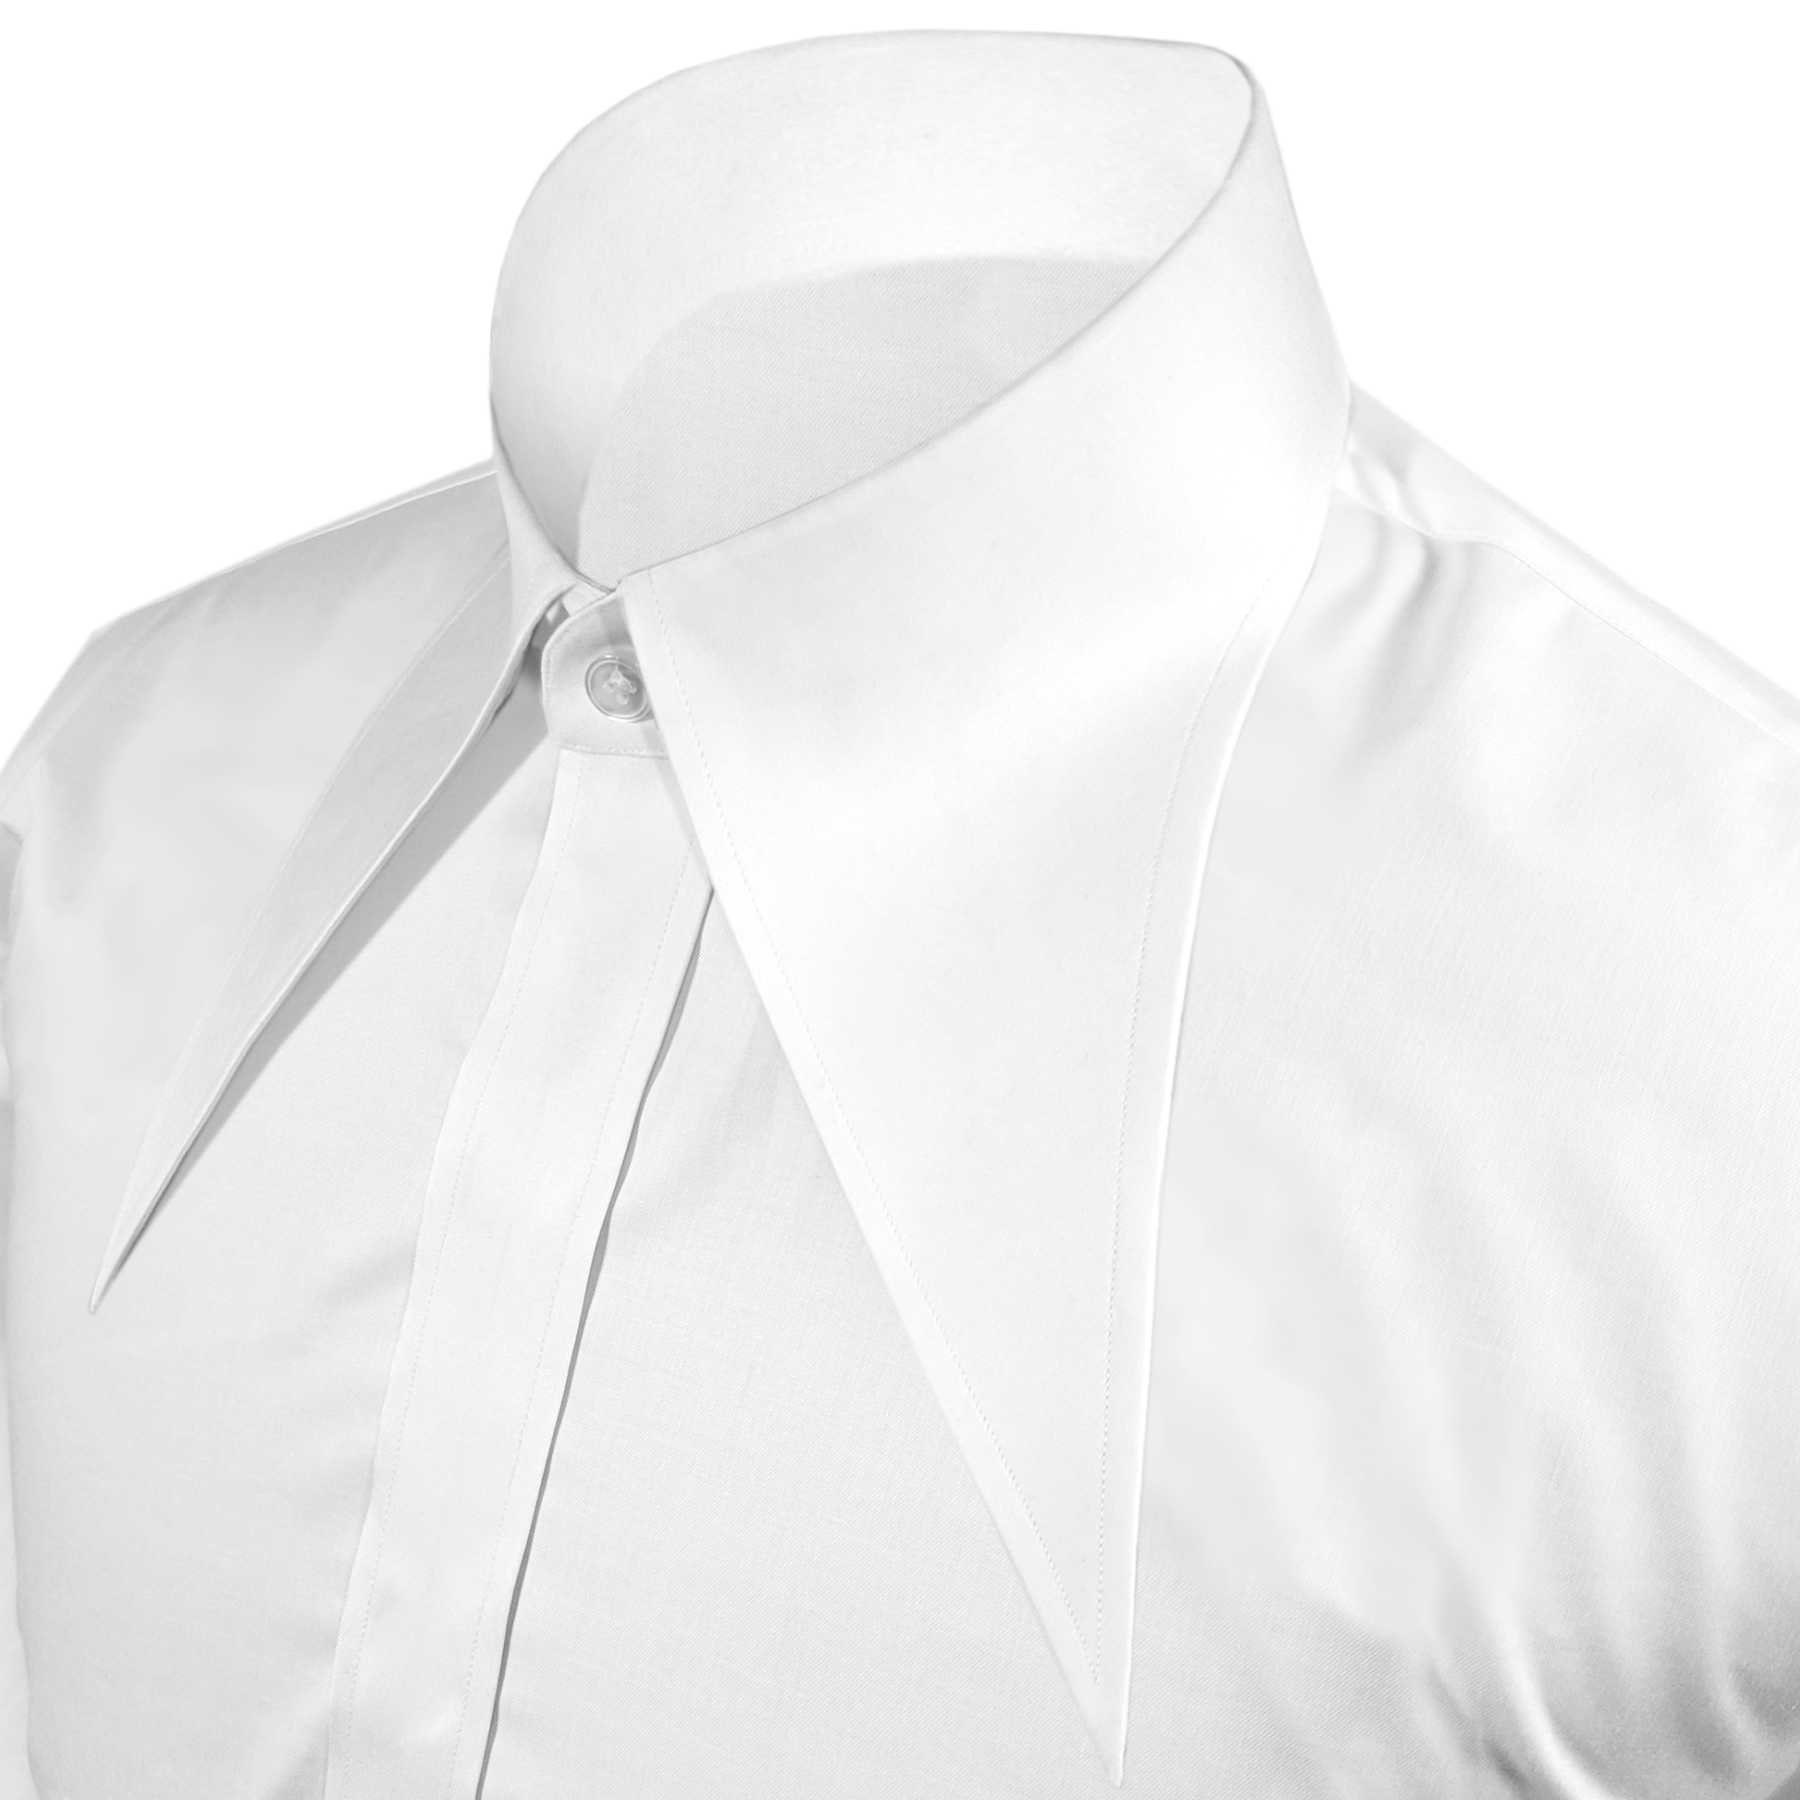 Wide Big Spear Point Collar/ 7.5'' Extreme Long Point White Groom Dress ...